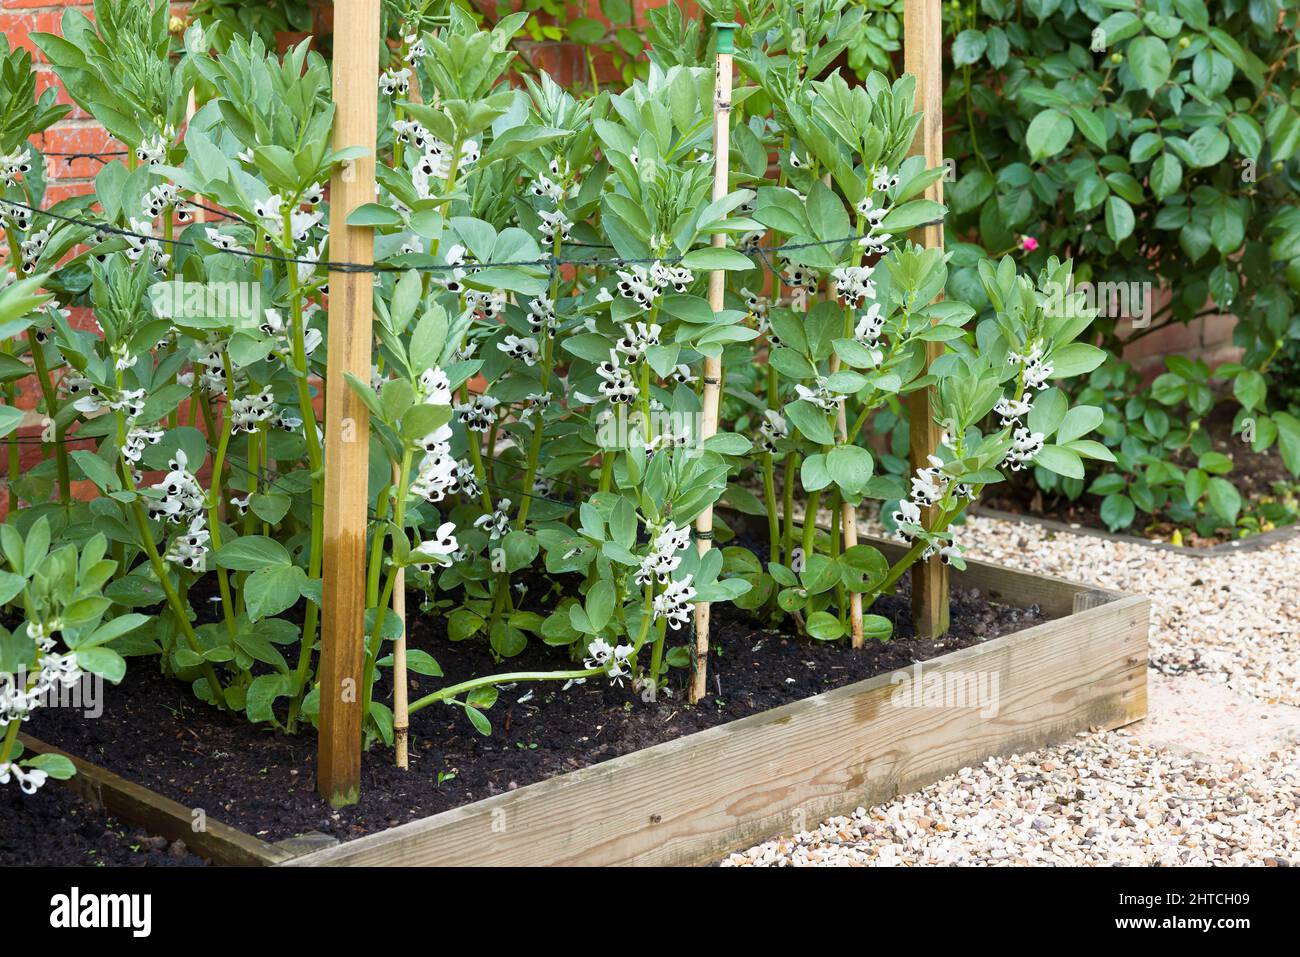 Broad beans in flower, plants growing in a vegetable plot in an English garden, UK Stock Photo